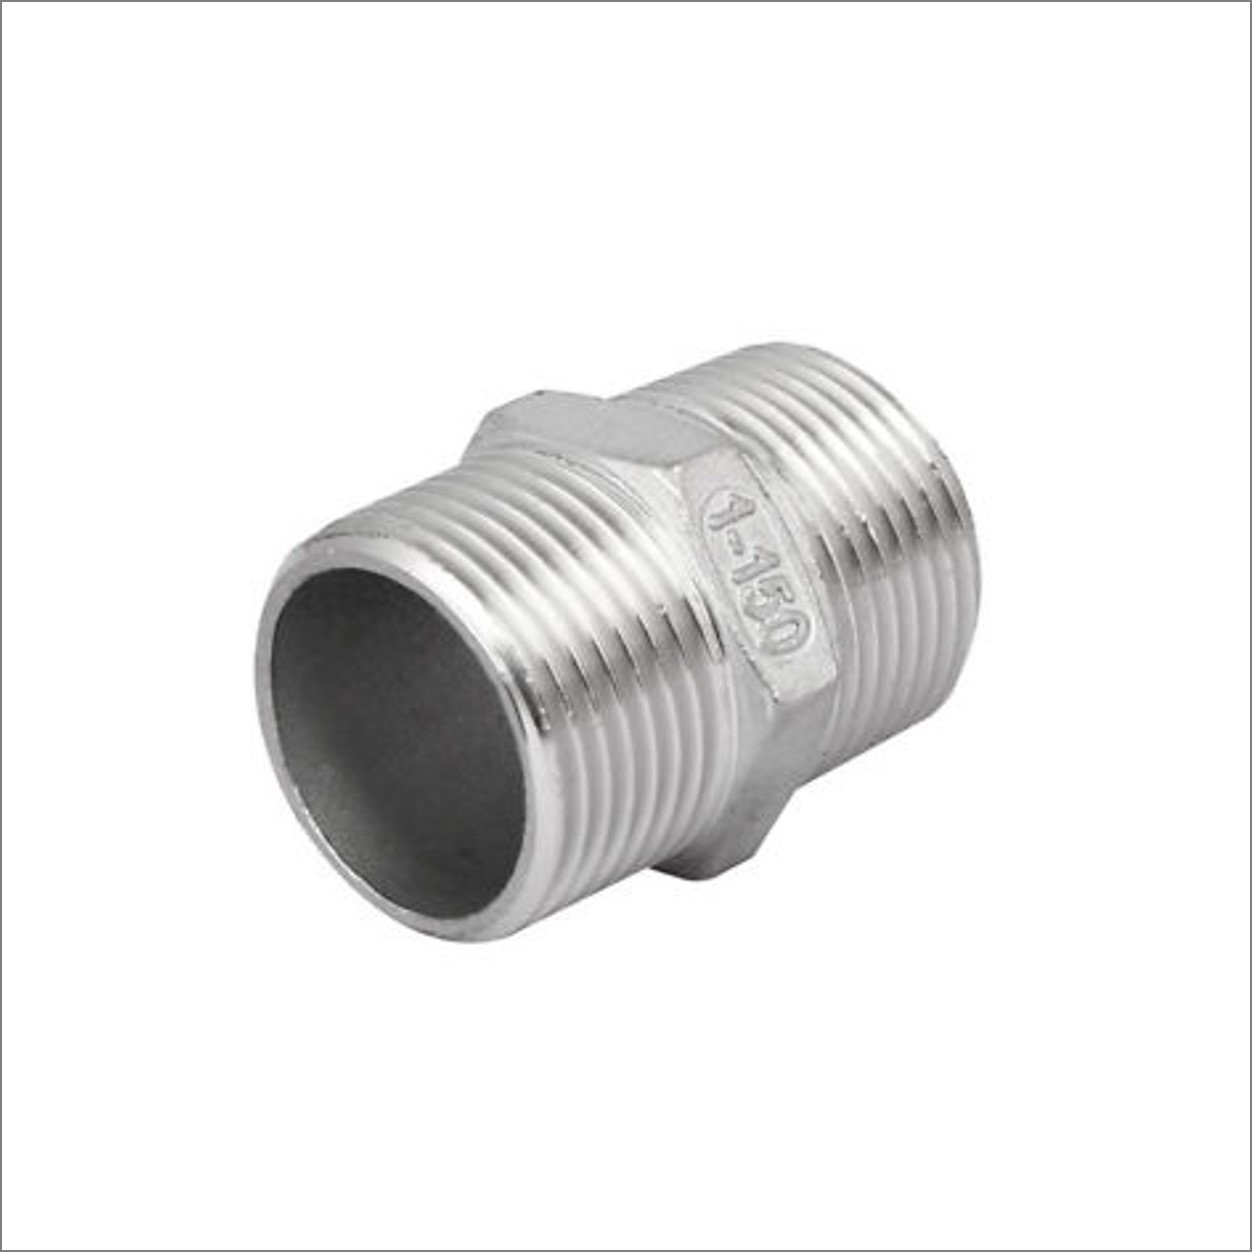 Rated 150LB Stainless Steel 316 Hexagon Nipple BSP 1/8" To 4" 